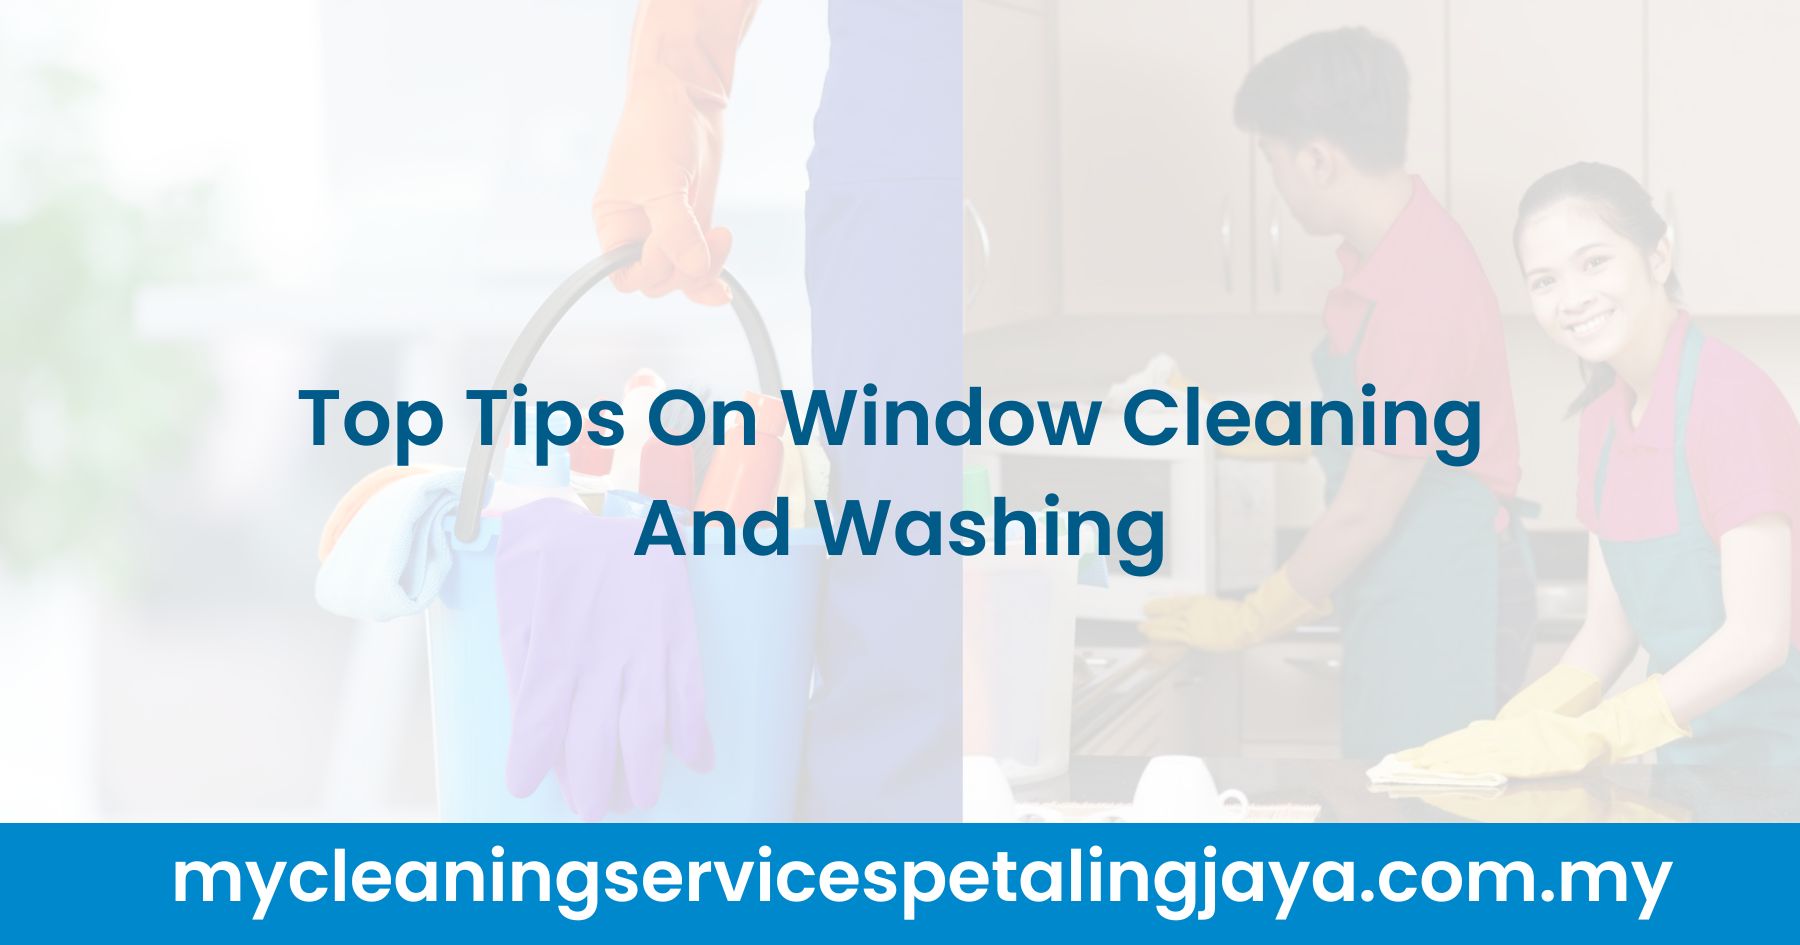 Top Tips On Window Cleaning And Washing